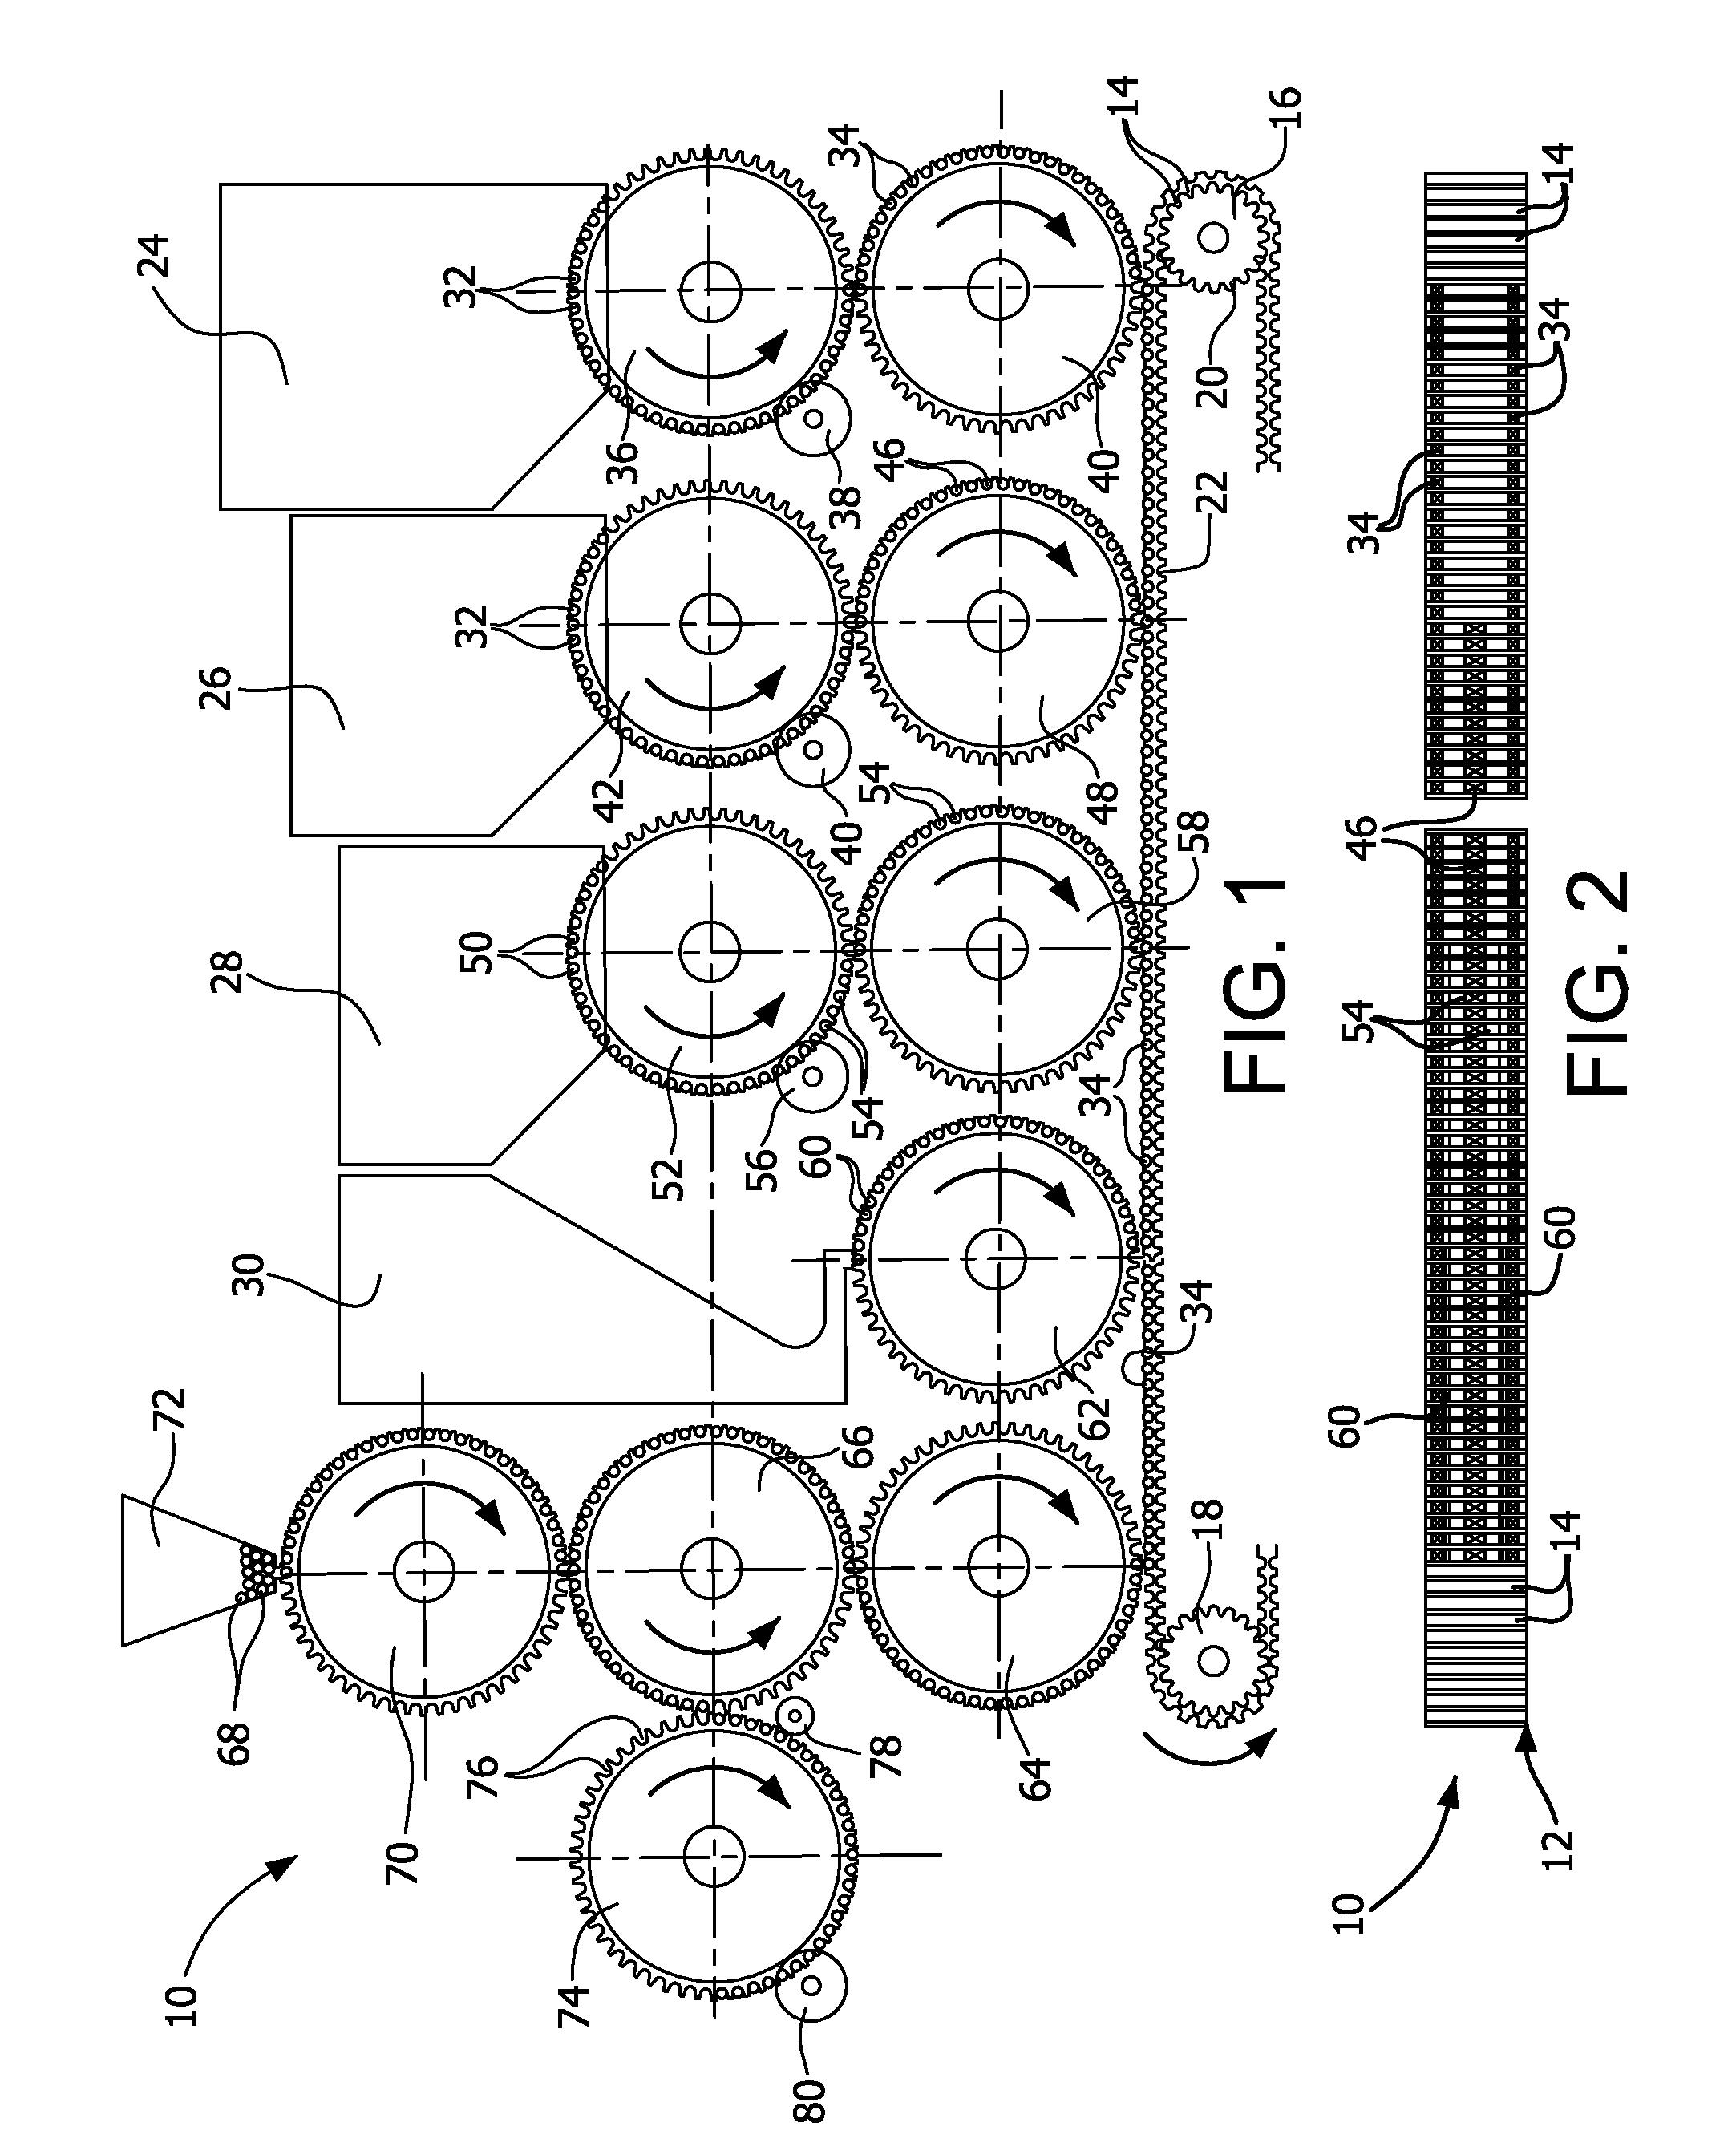 Compound horizontal filter assembly machine and process